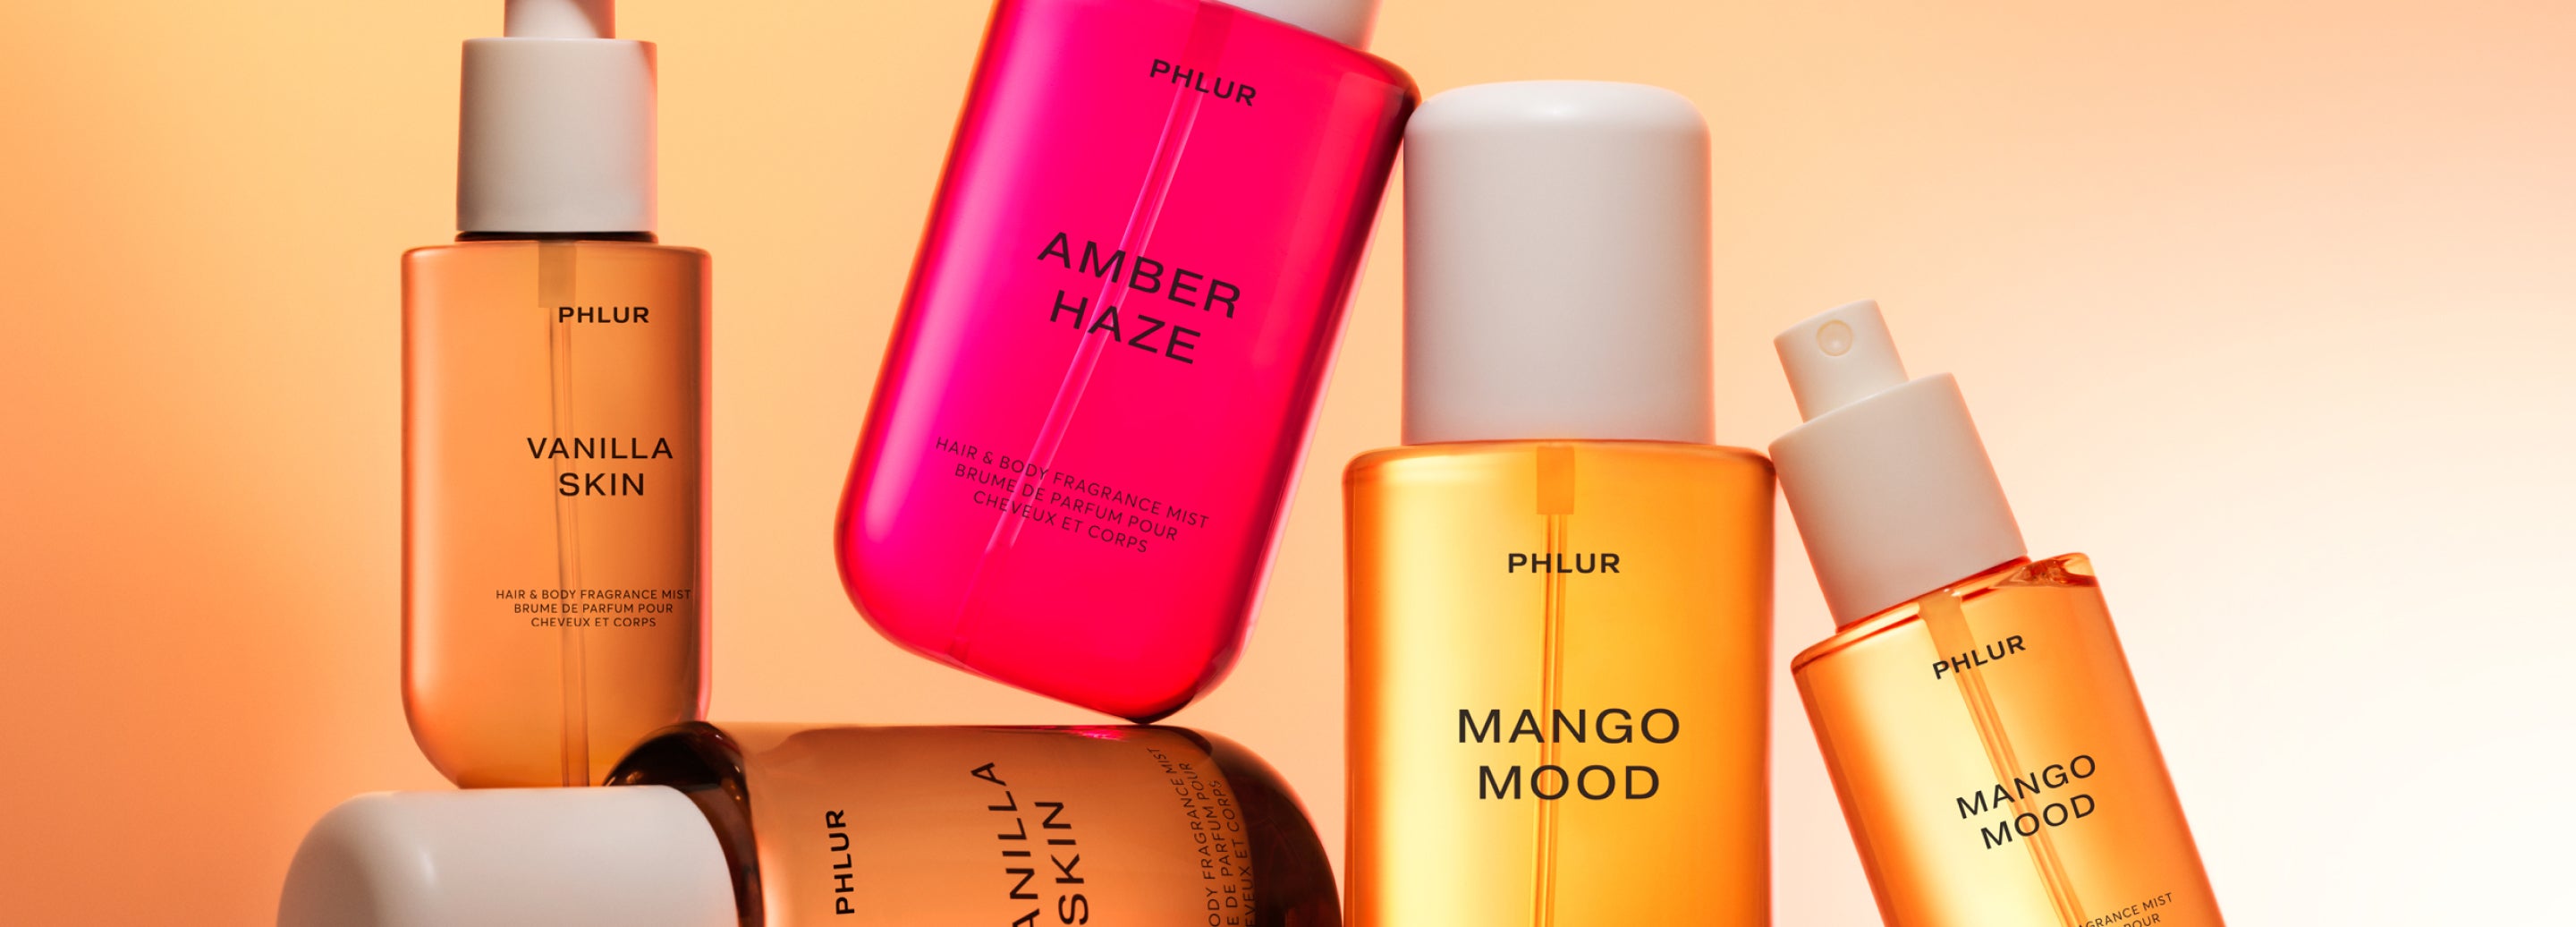 Phlur Launches Body & Hair Mists. Fragrance mists you can apply